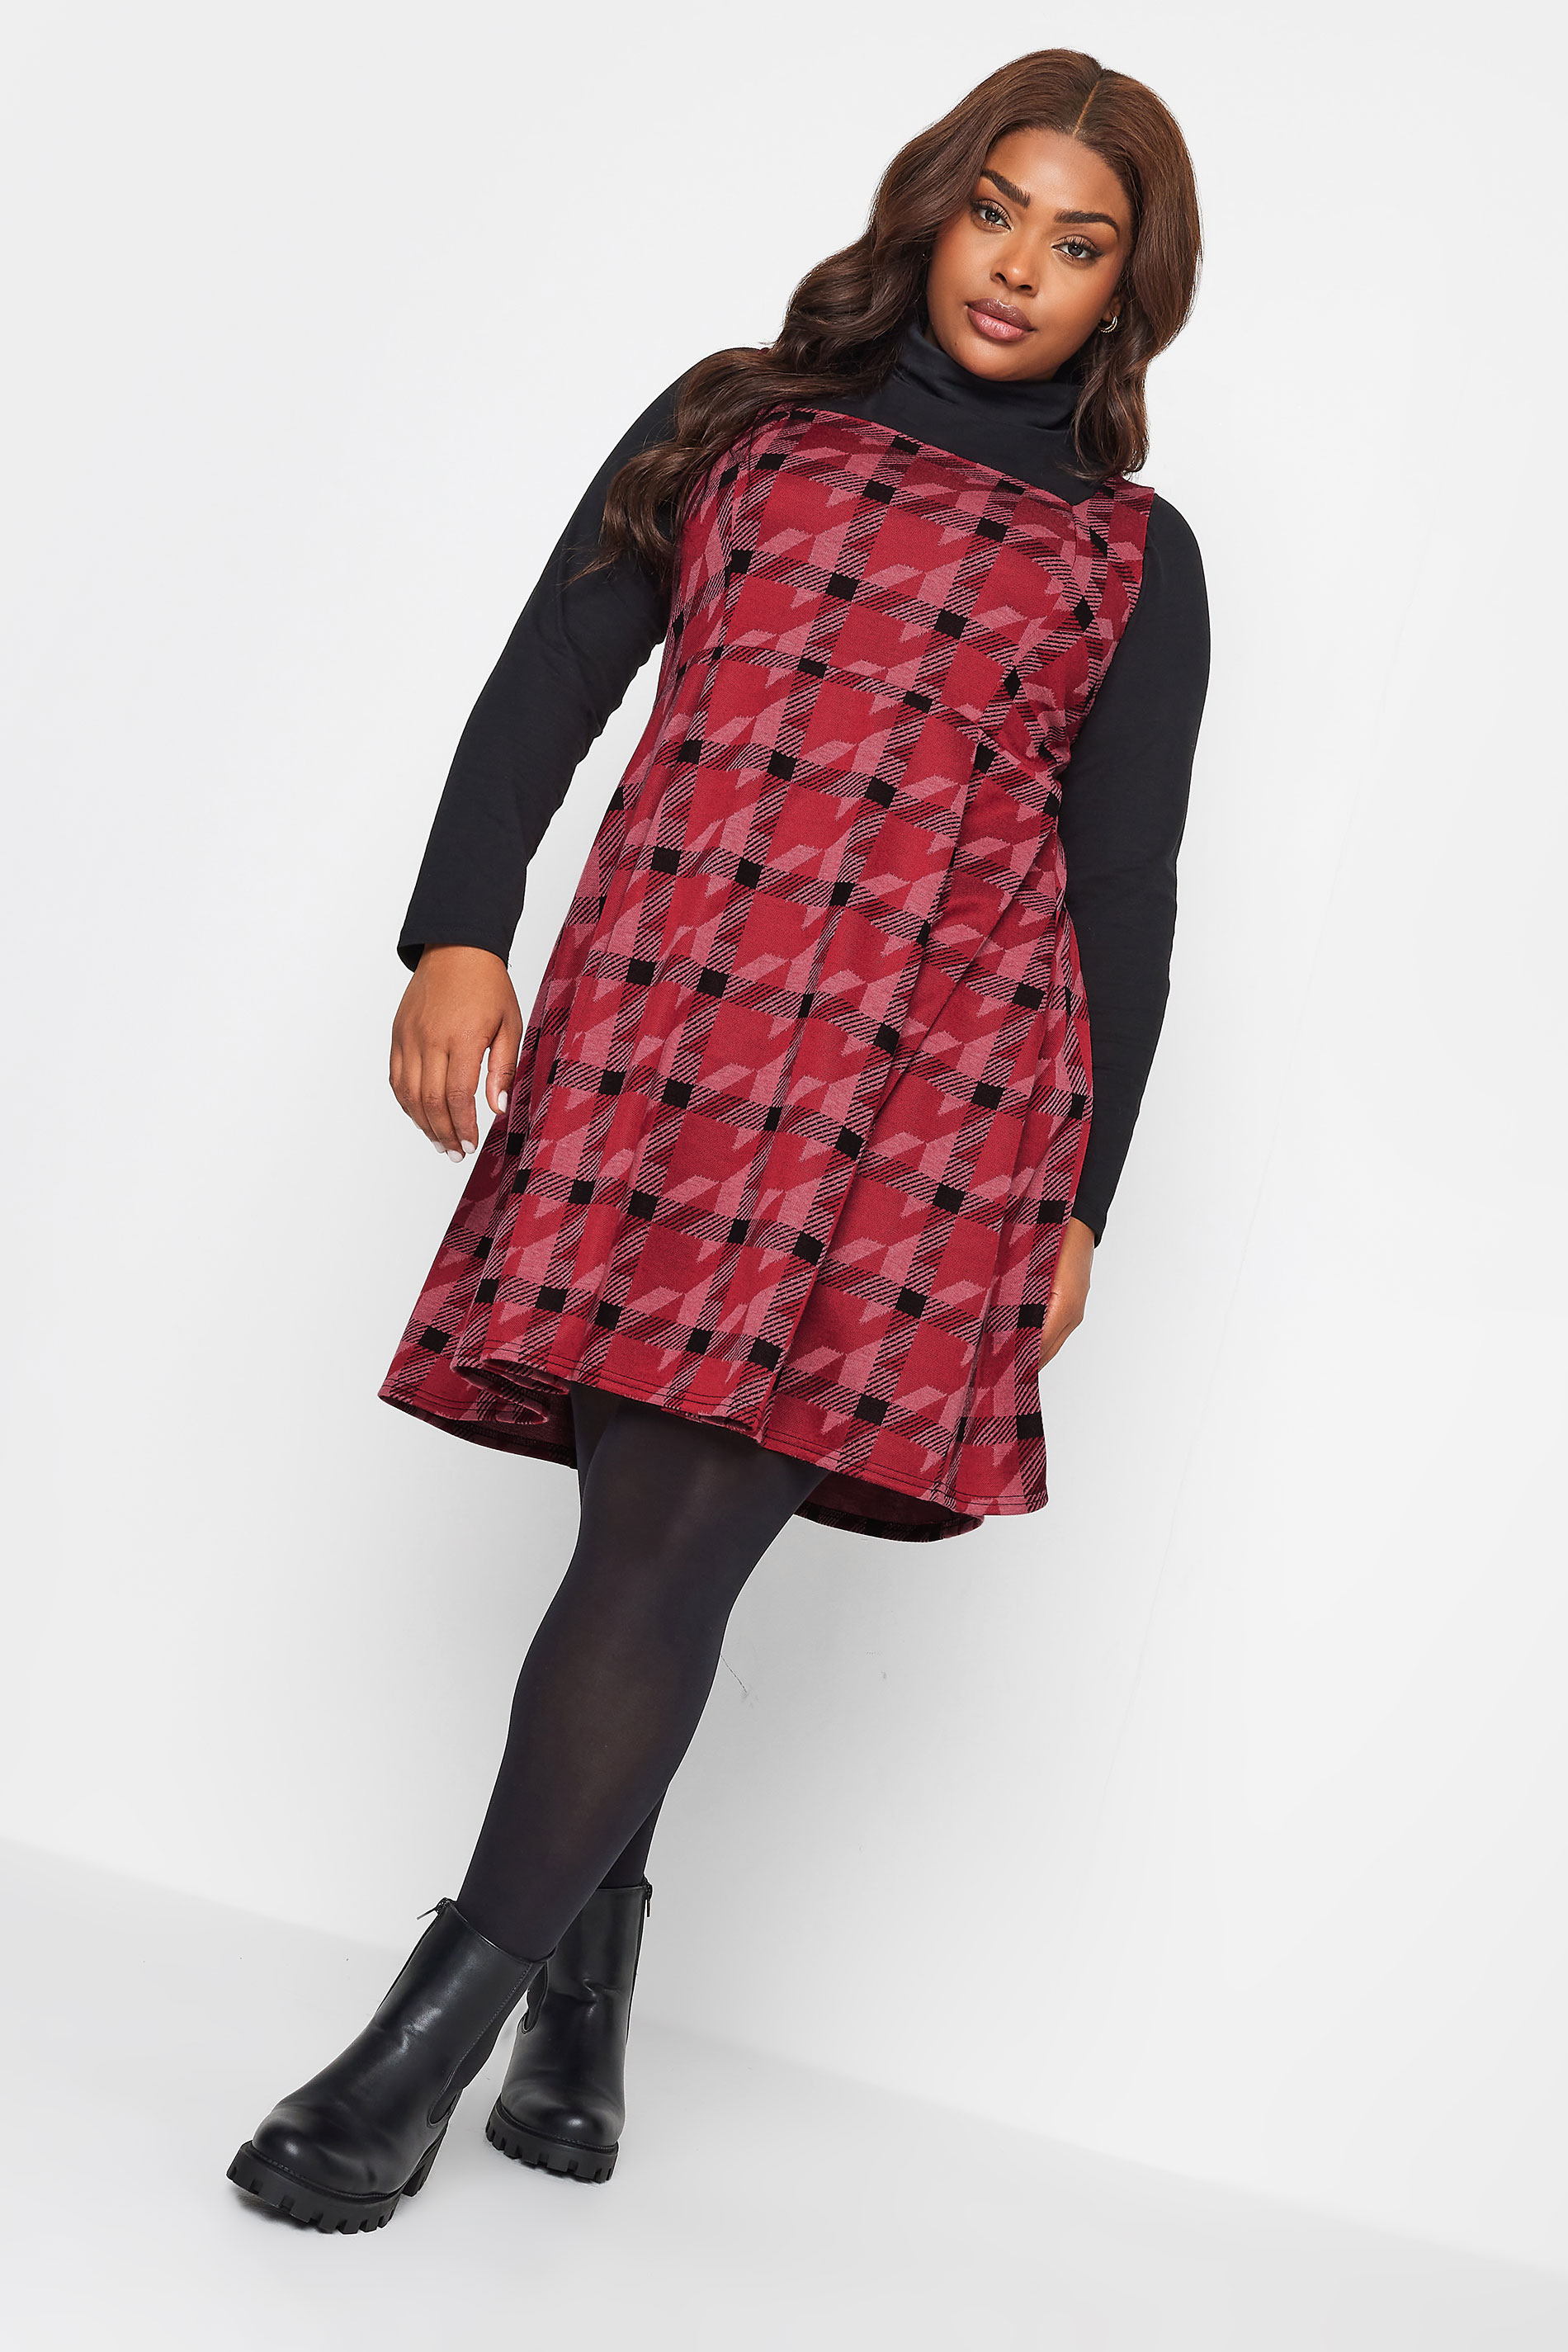 LIMITED COLLECTION Plus Size Red Dogtooth Square Neck Pinafore Dress | Yours Clothing 1